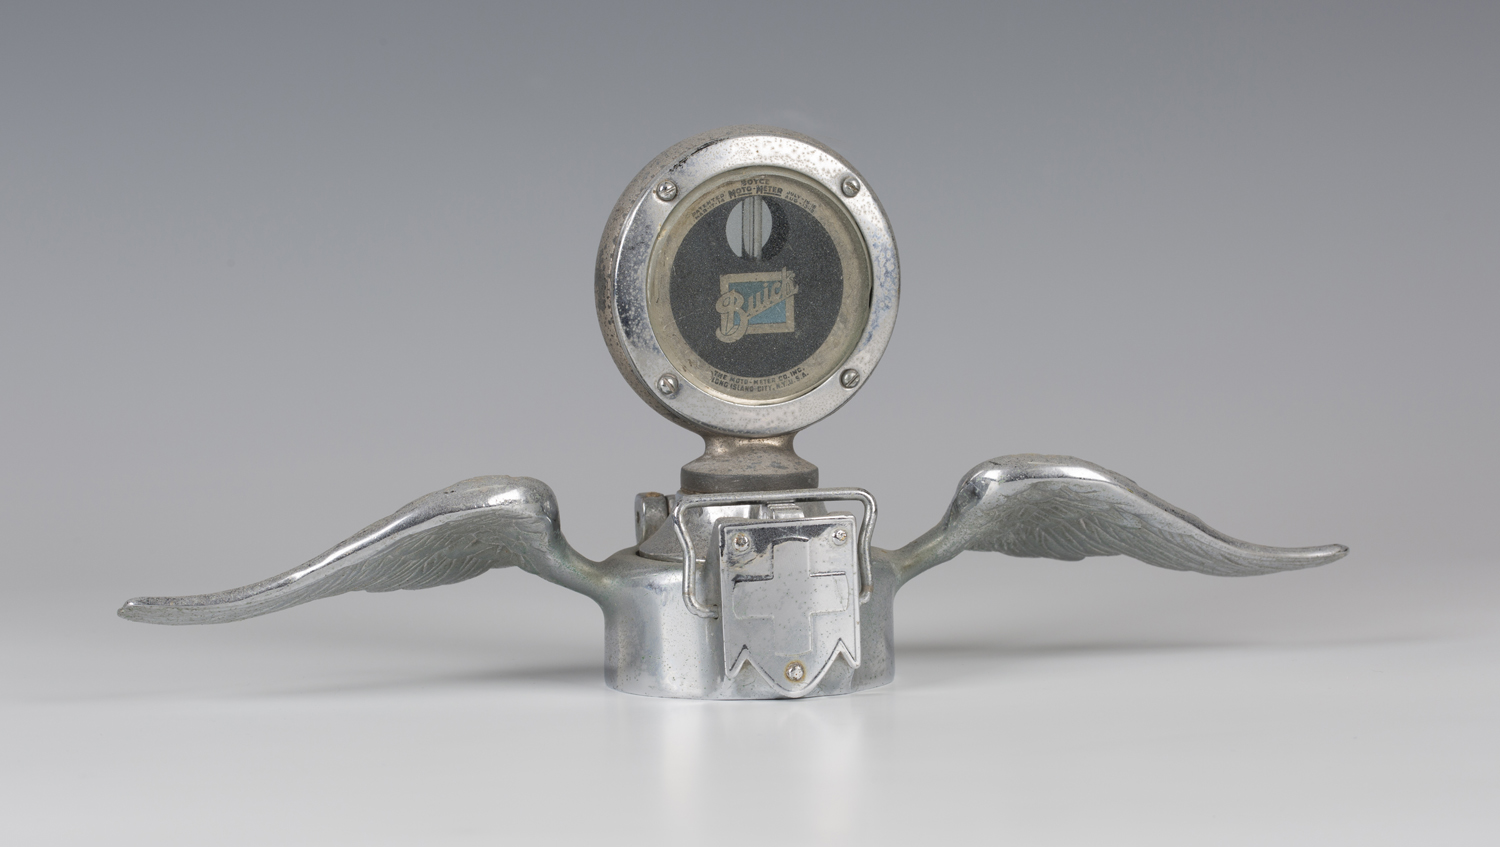 A Boyce Moto-Meter for a Buick motor car, with chromium plated finish and quick release cap, flanked